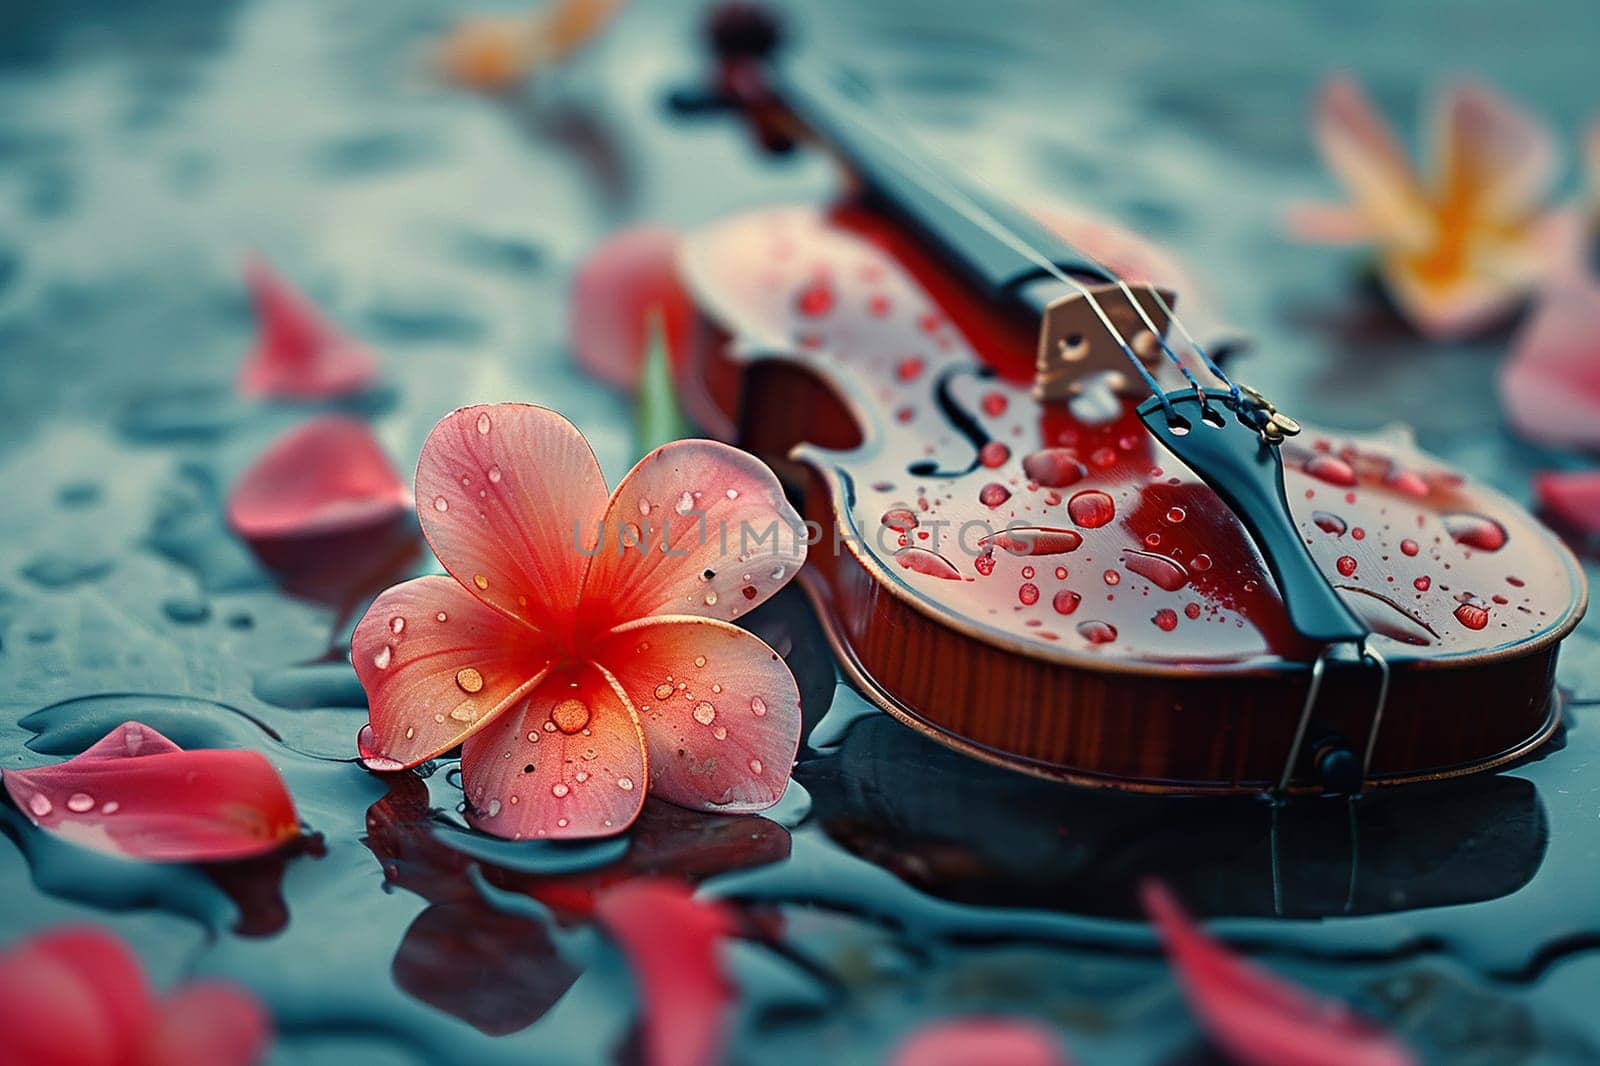 An image of a violin with drops of water and a beautiful flower nearby. Musical art beauty concept.